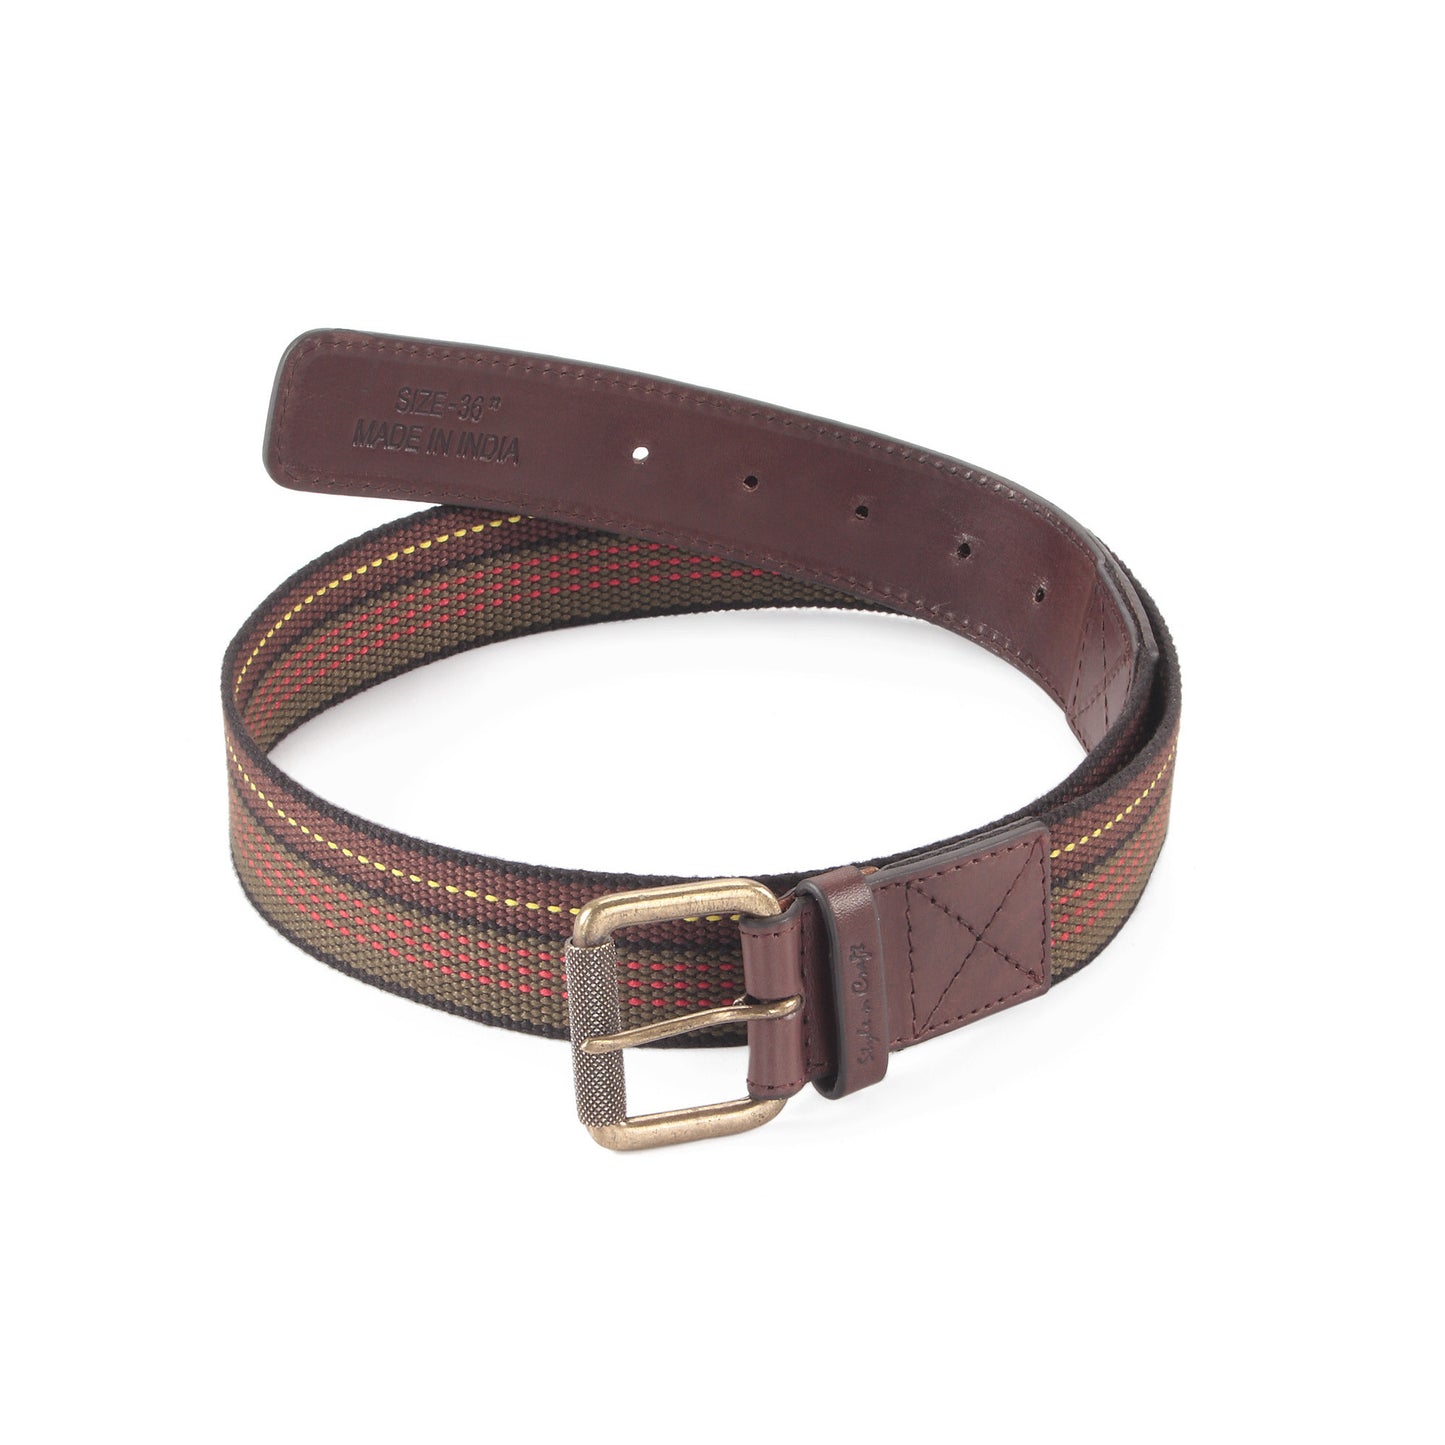 390306 - One and a Half Inch Wide Leather Webbing Combination Belt - brown color leather - front view